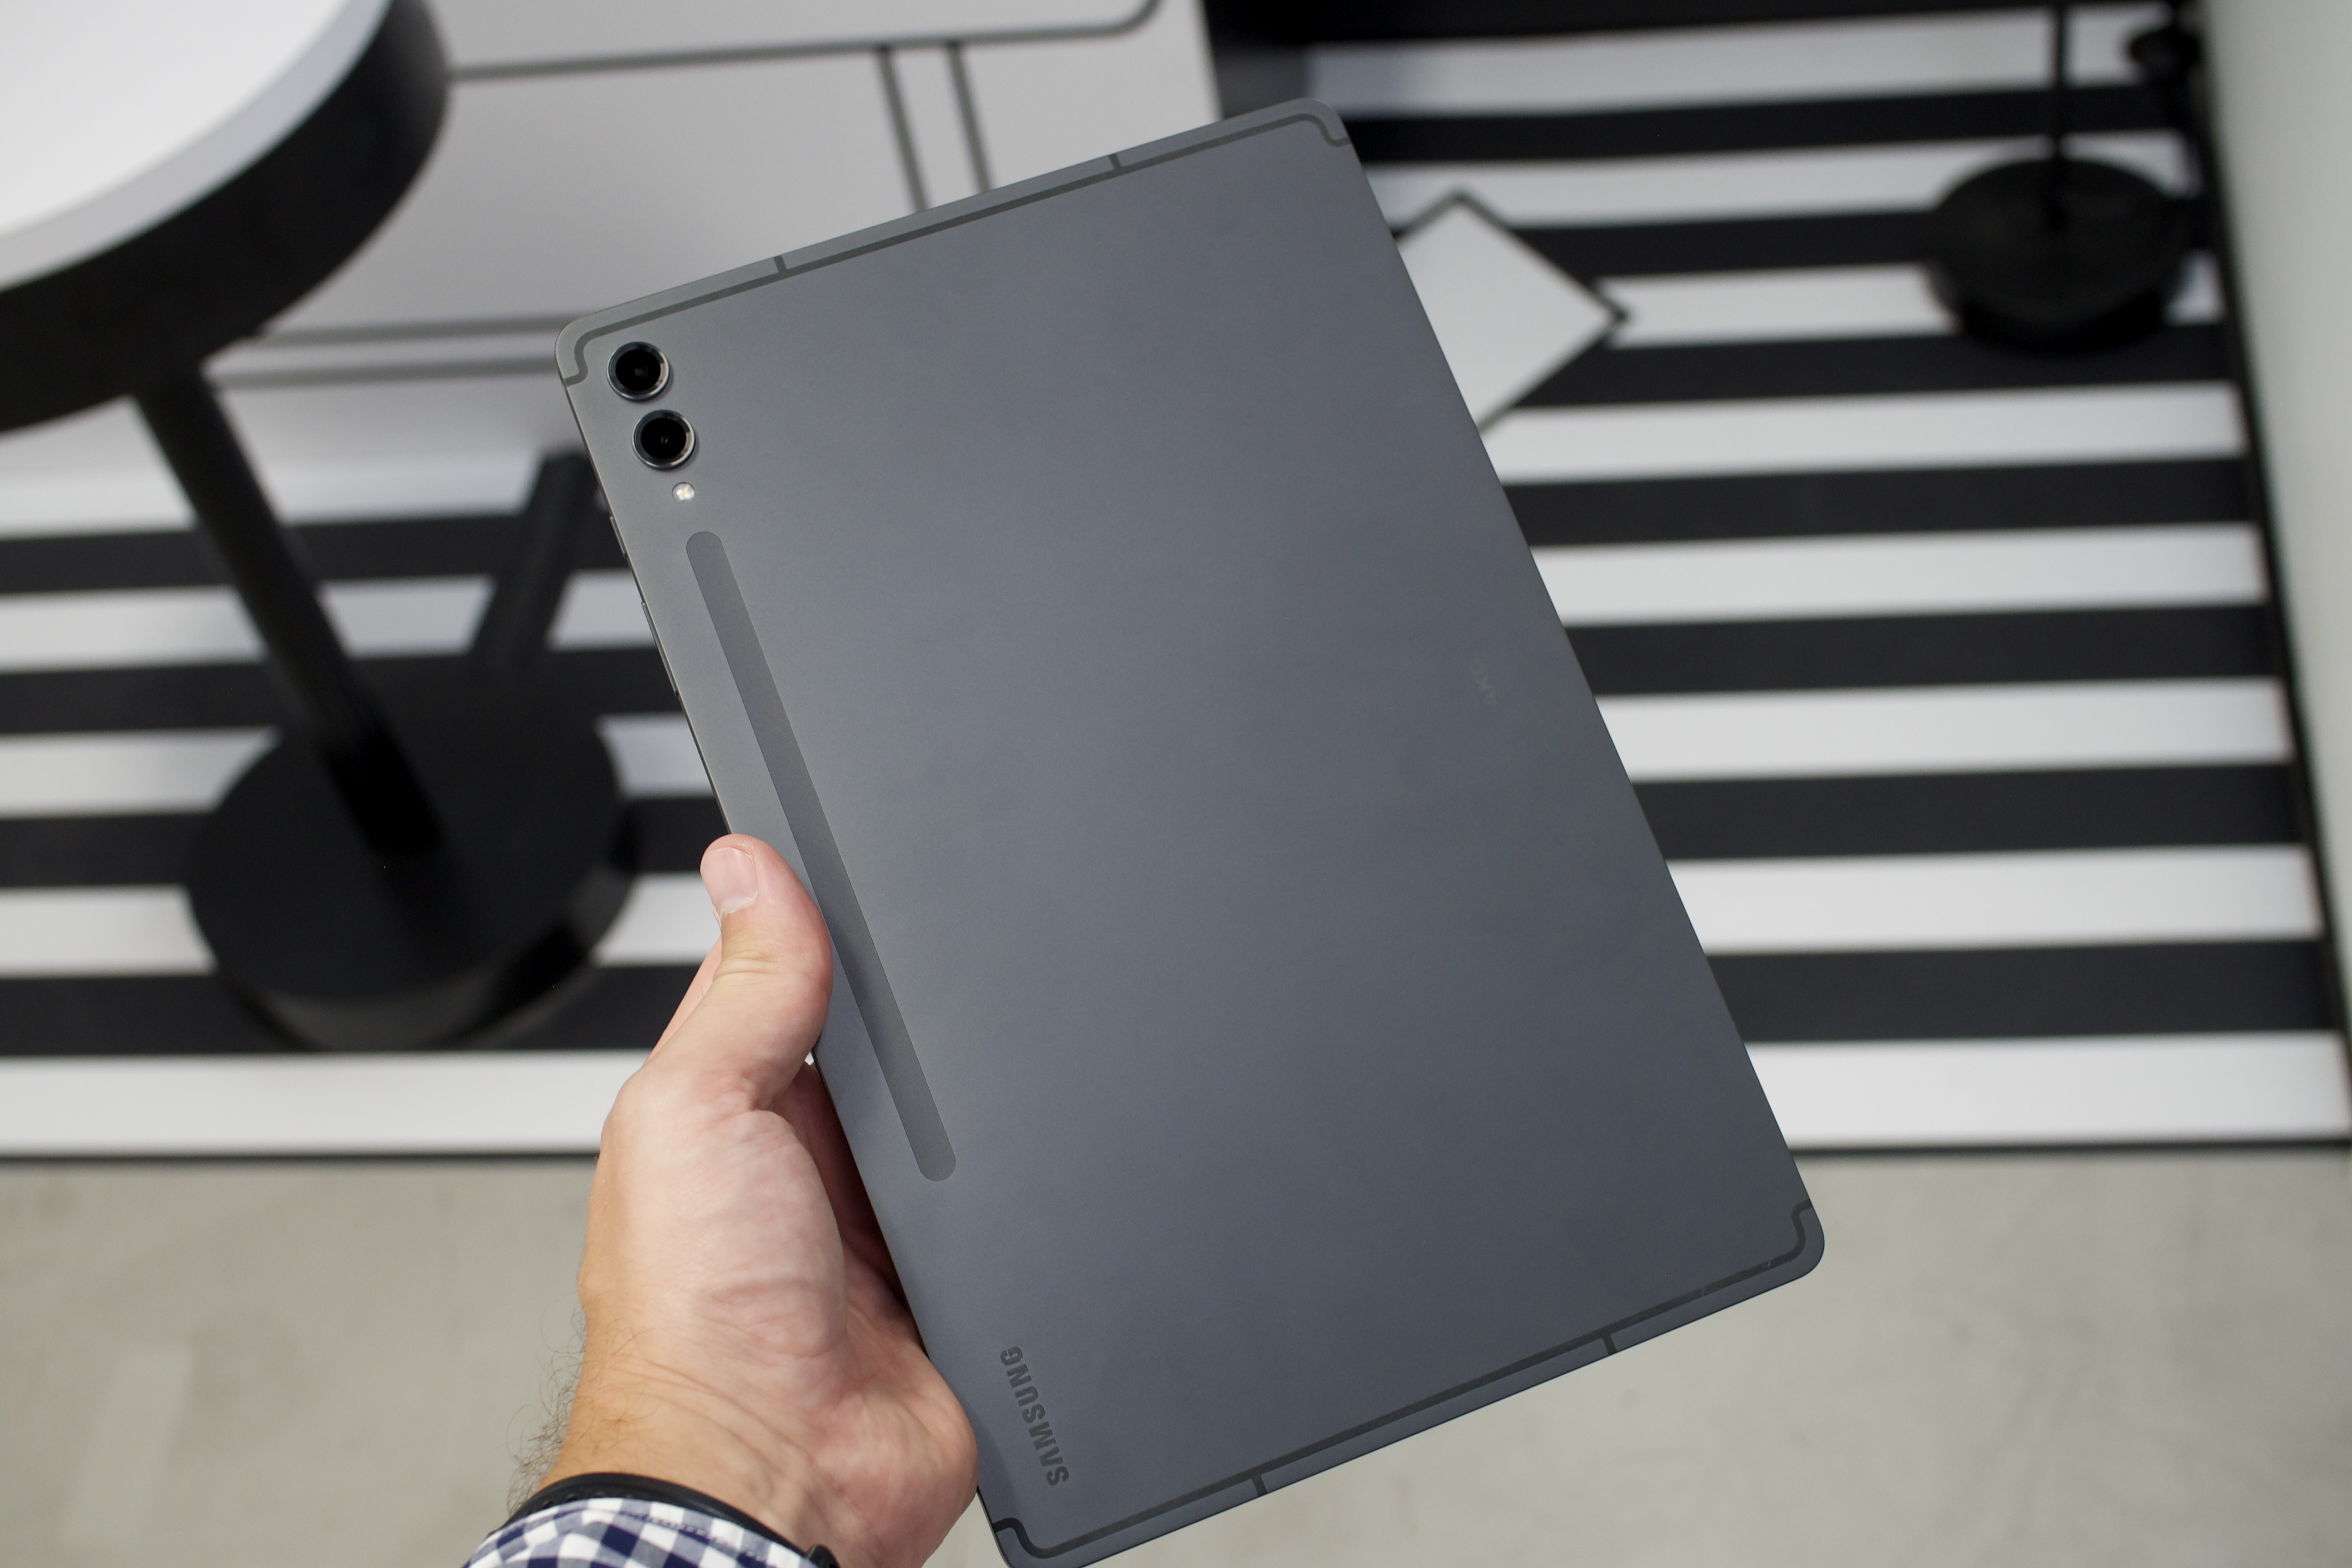 Samsung Galaxy Tab S8 Plus review: Best Android tablet despite imperfections